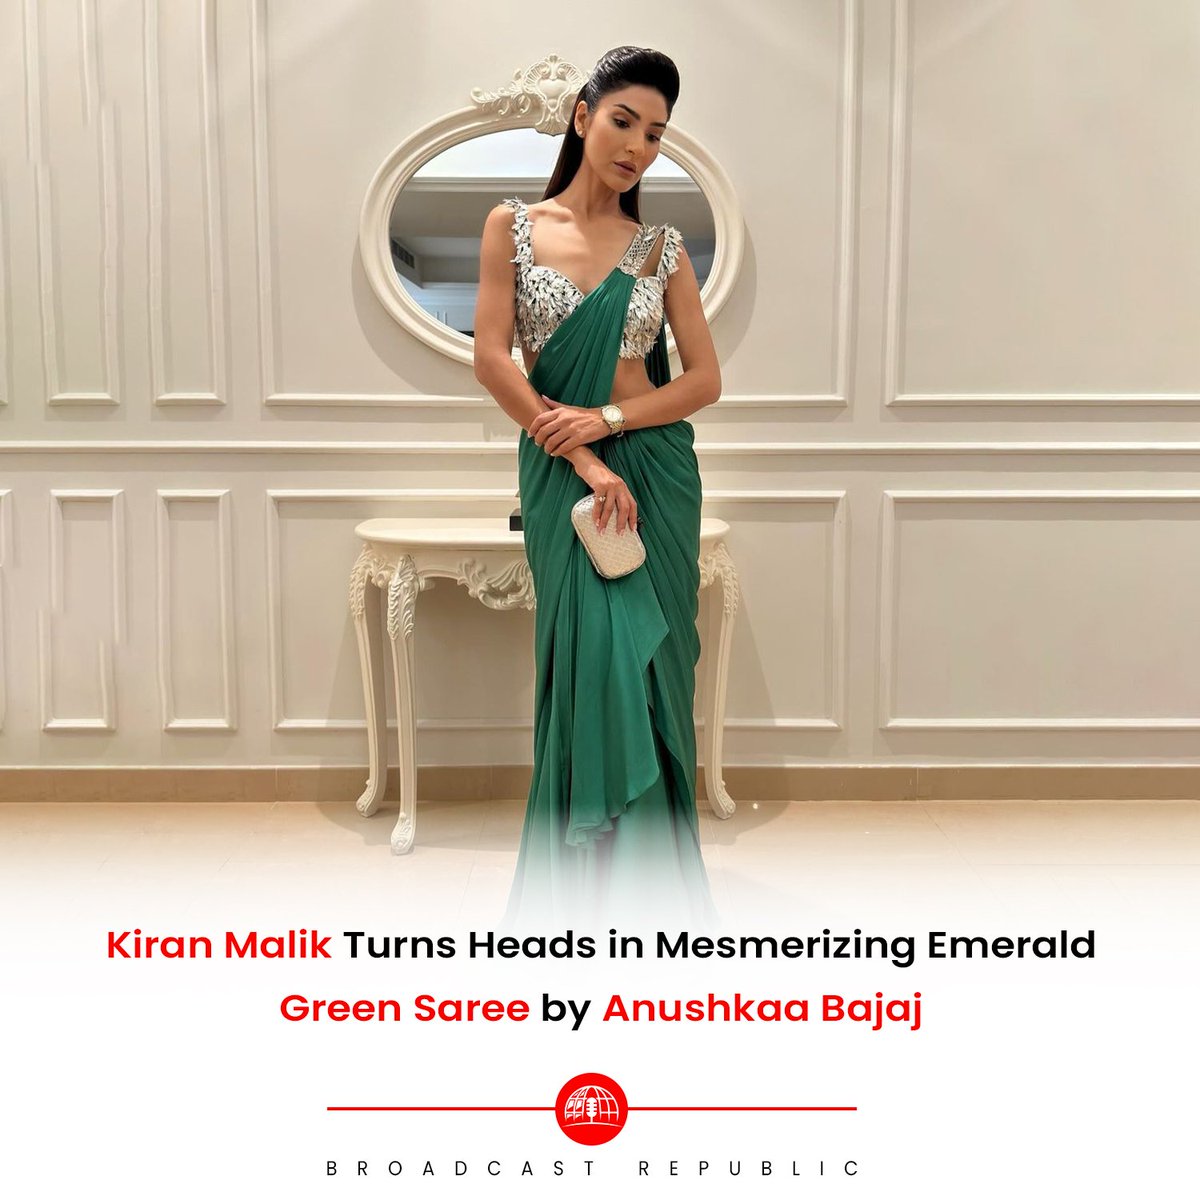 Pakistani actress and model Kiran Malik recently captivated attention with her dazzling appearance in a stunning emerald green saree paired with a glamorous silver blouse by Anushkaa Bajaj. 

#BroadcastRepublic #KiranMalik #AnushkaaBajaj #GlamorousLook #PakistaniFashion